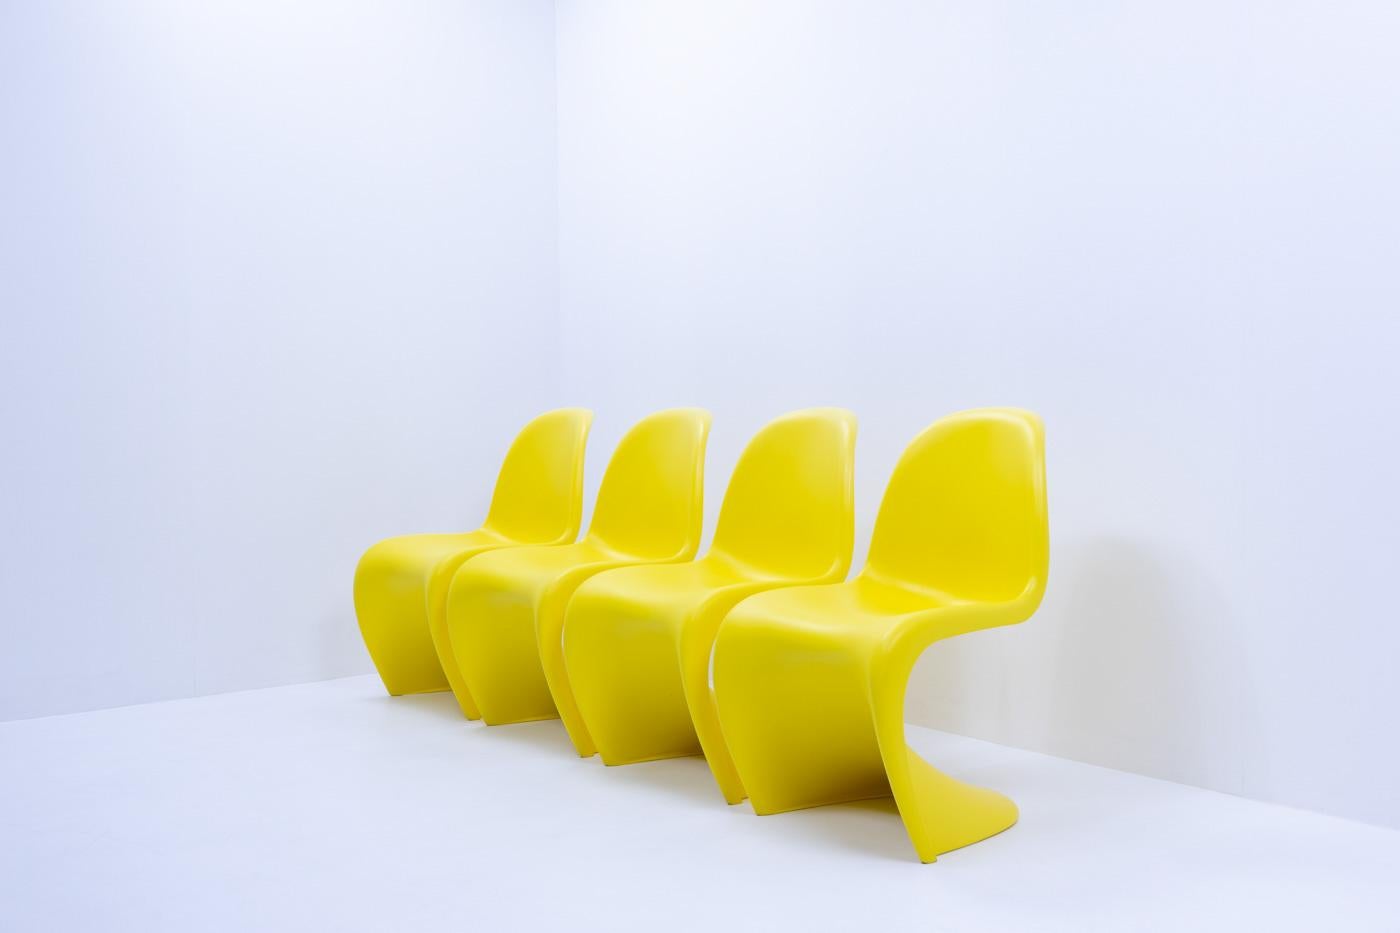 Contemporary Verner Panton Chairs, Yellow by Vitra, 2000s